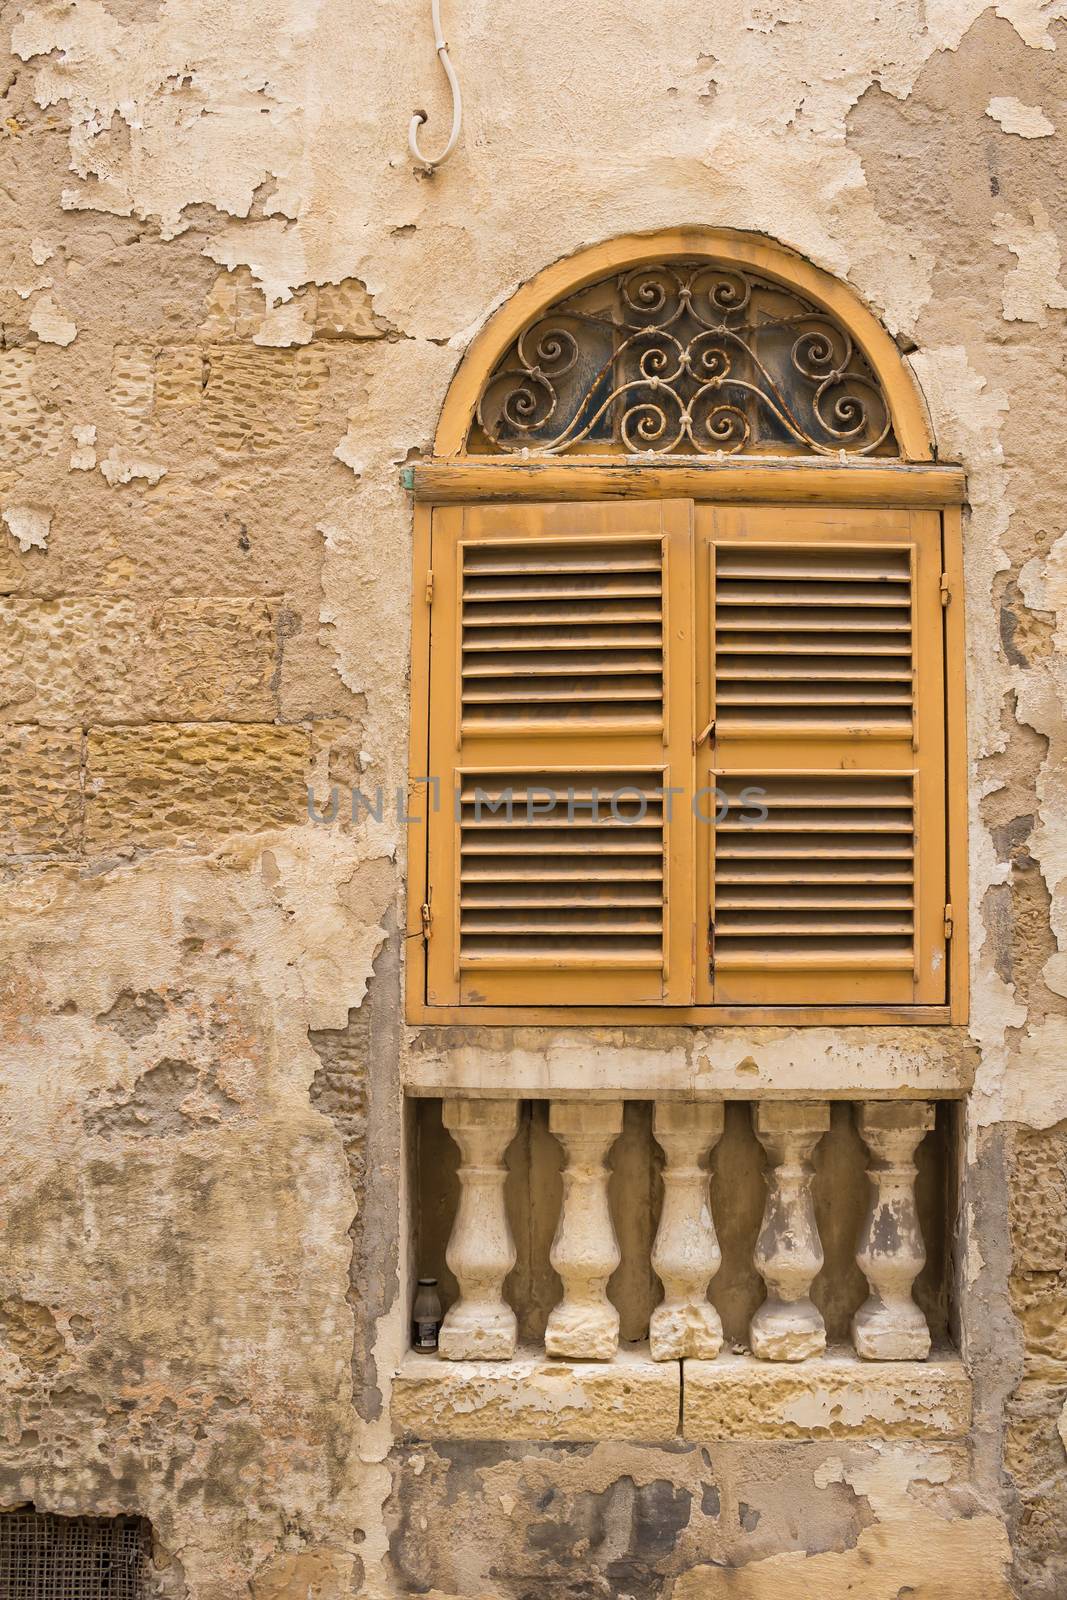 Facade of an old stone house. Window with an arch and yellow closed shutter. Decorative columns under the window. Senglea, island Malta.